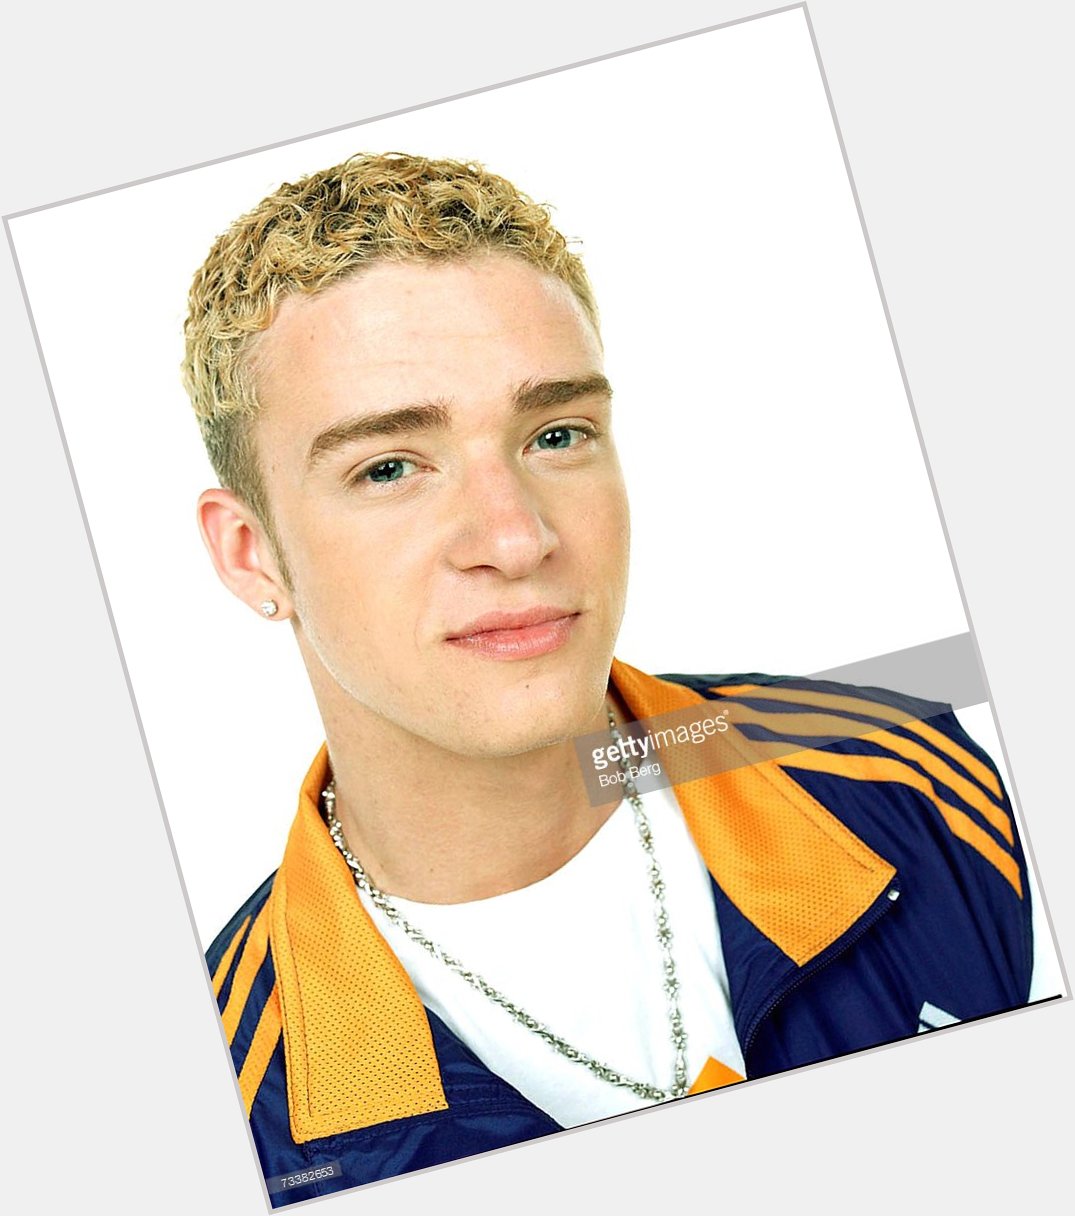 15 photos of Justin Timberlake in honor of his 36th birthday: 